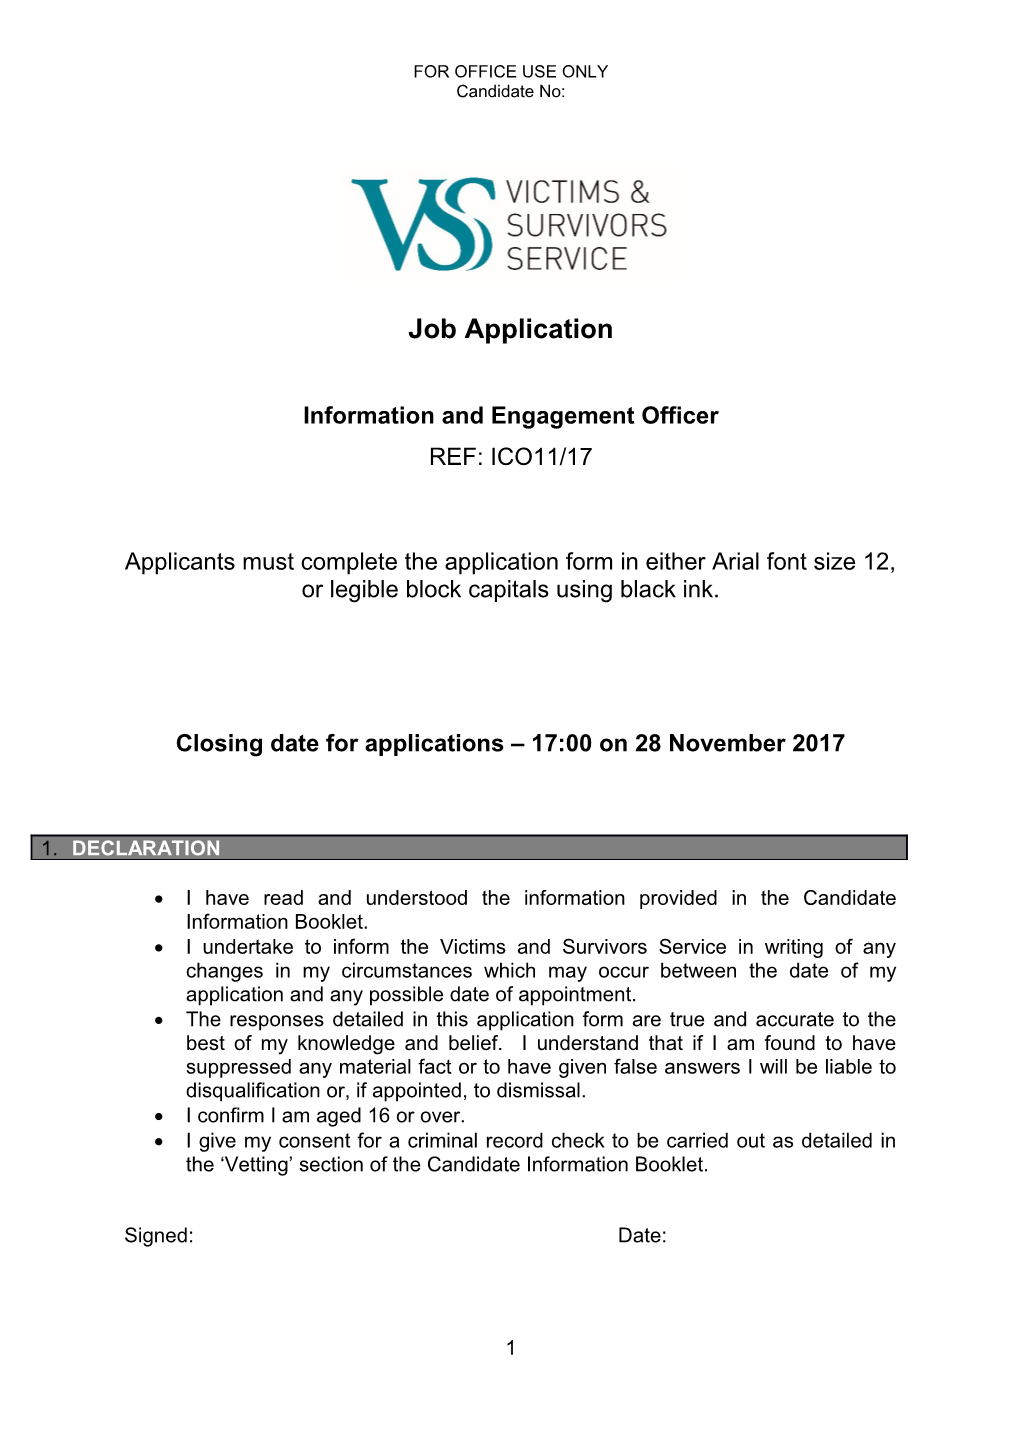 Closing Date for Applications 17:00 on 28November 2017